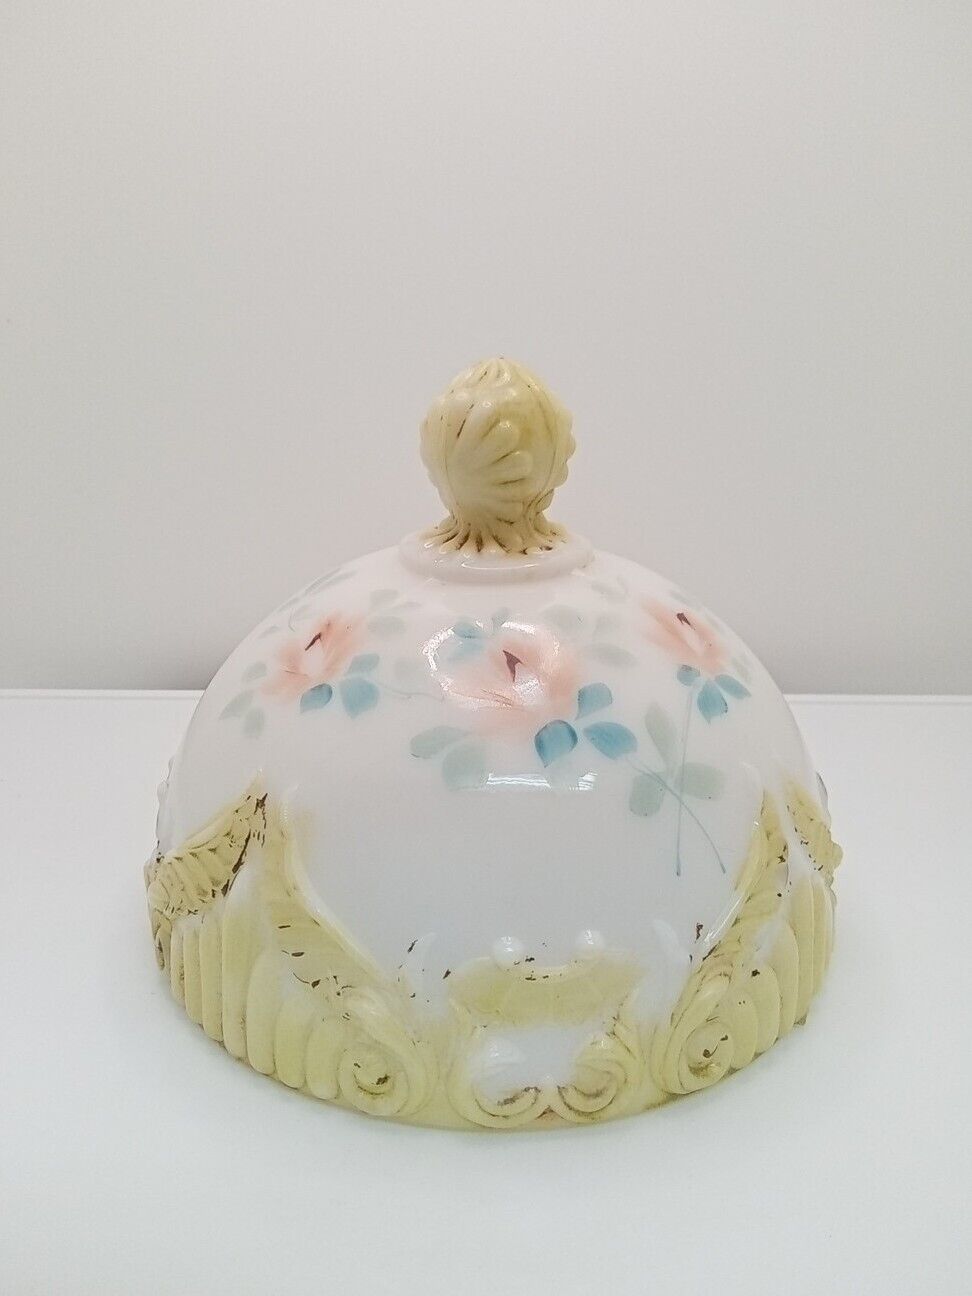 Antique Dithridge Victorian Milk Glass Butter Dome #138 Shabby Chic No Plate 